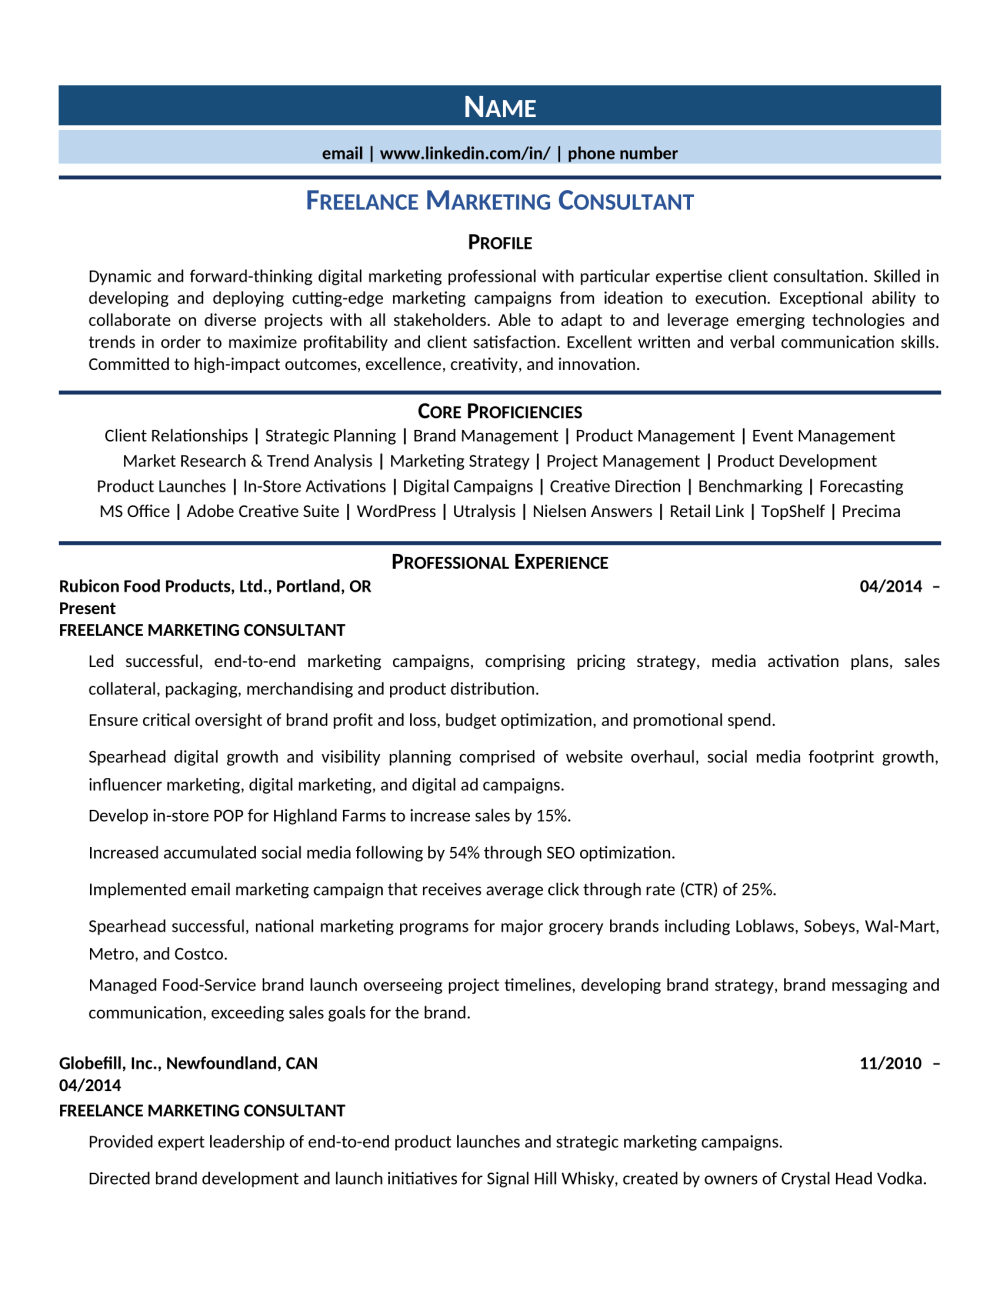 Freelance Marketing Consultant Resume Template 0001 1 ?w=1000&h=1294&q=90&fm=png